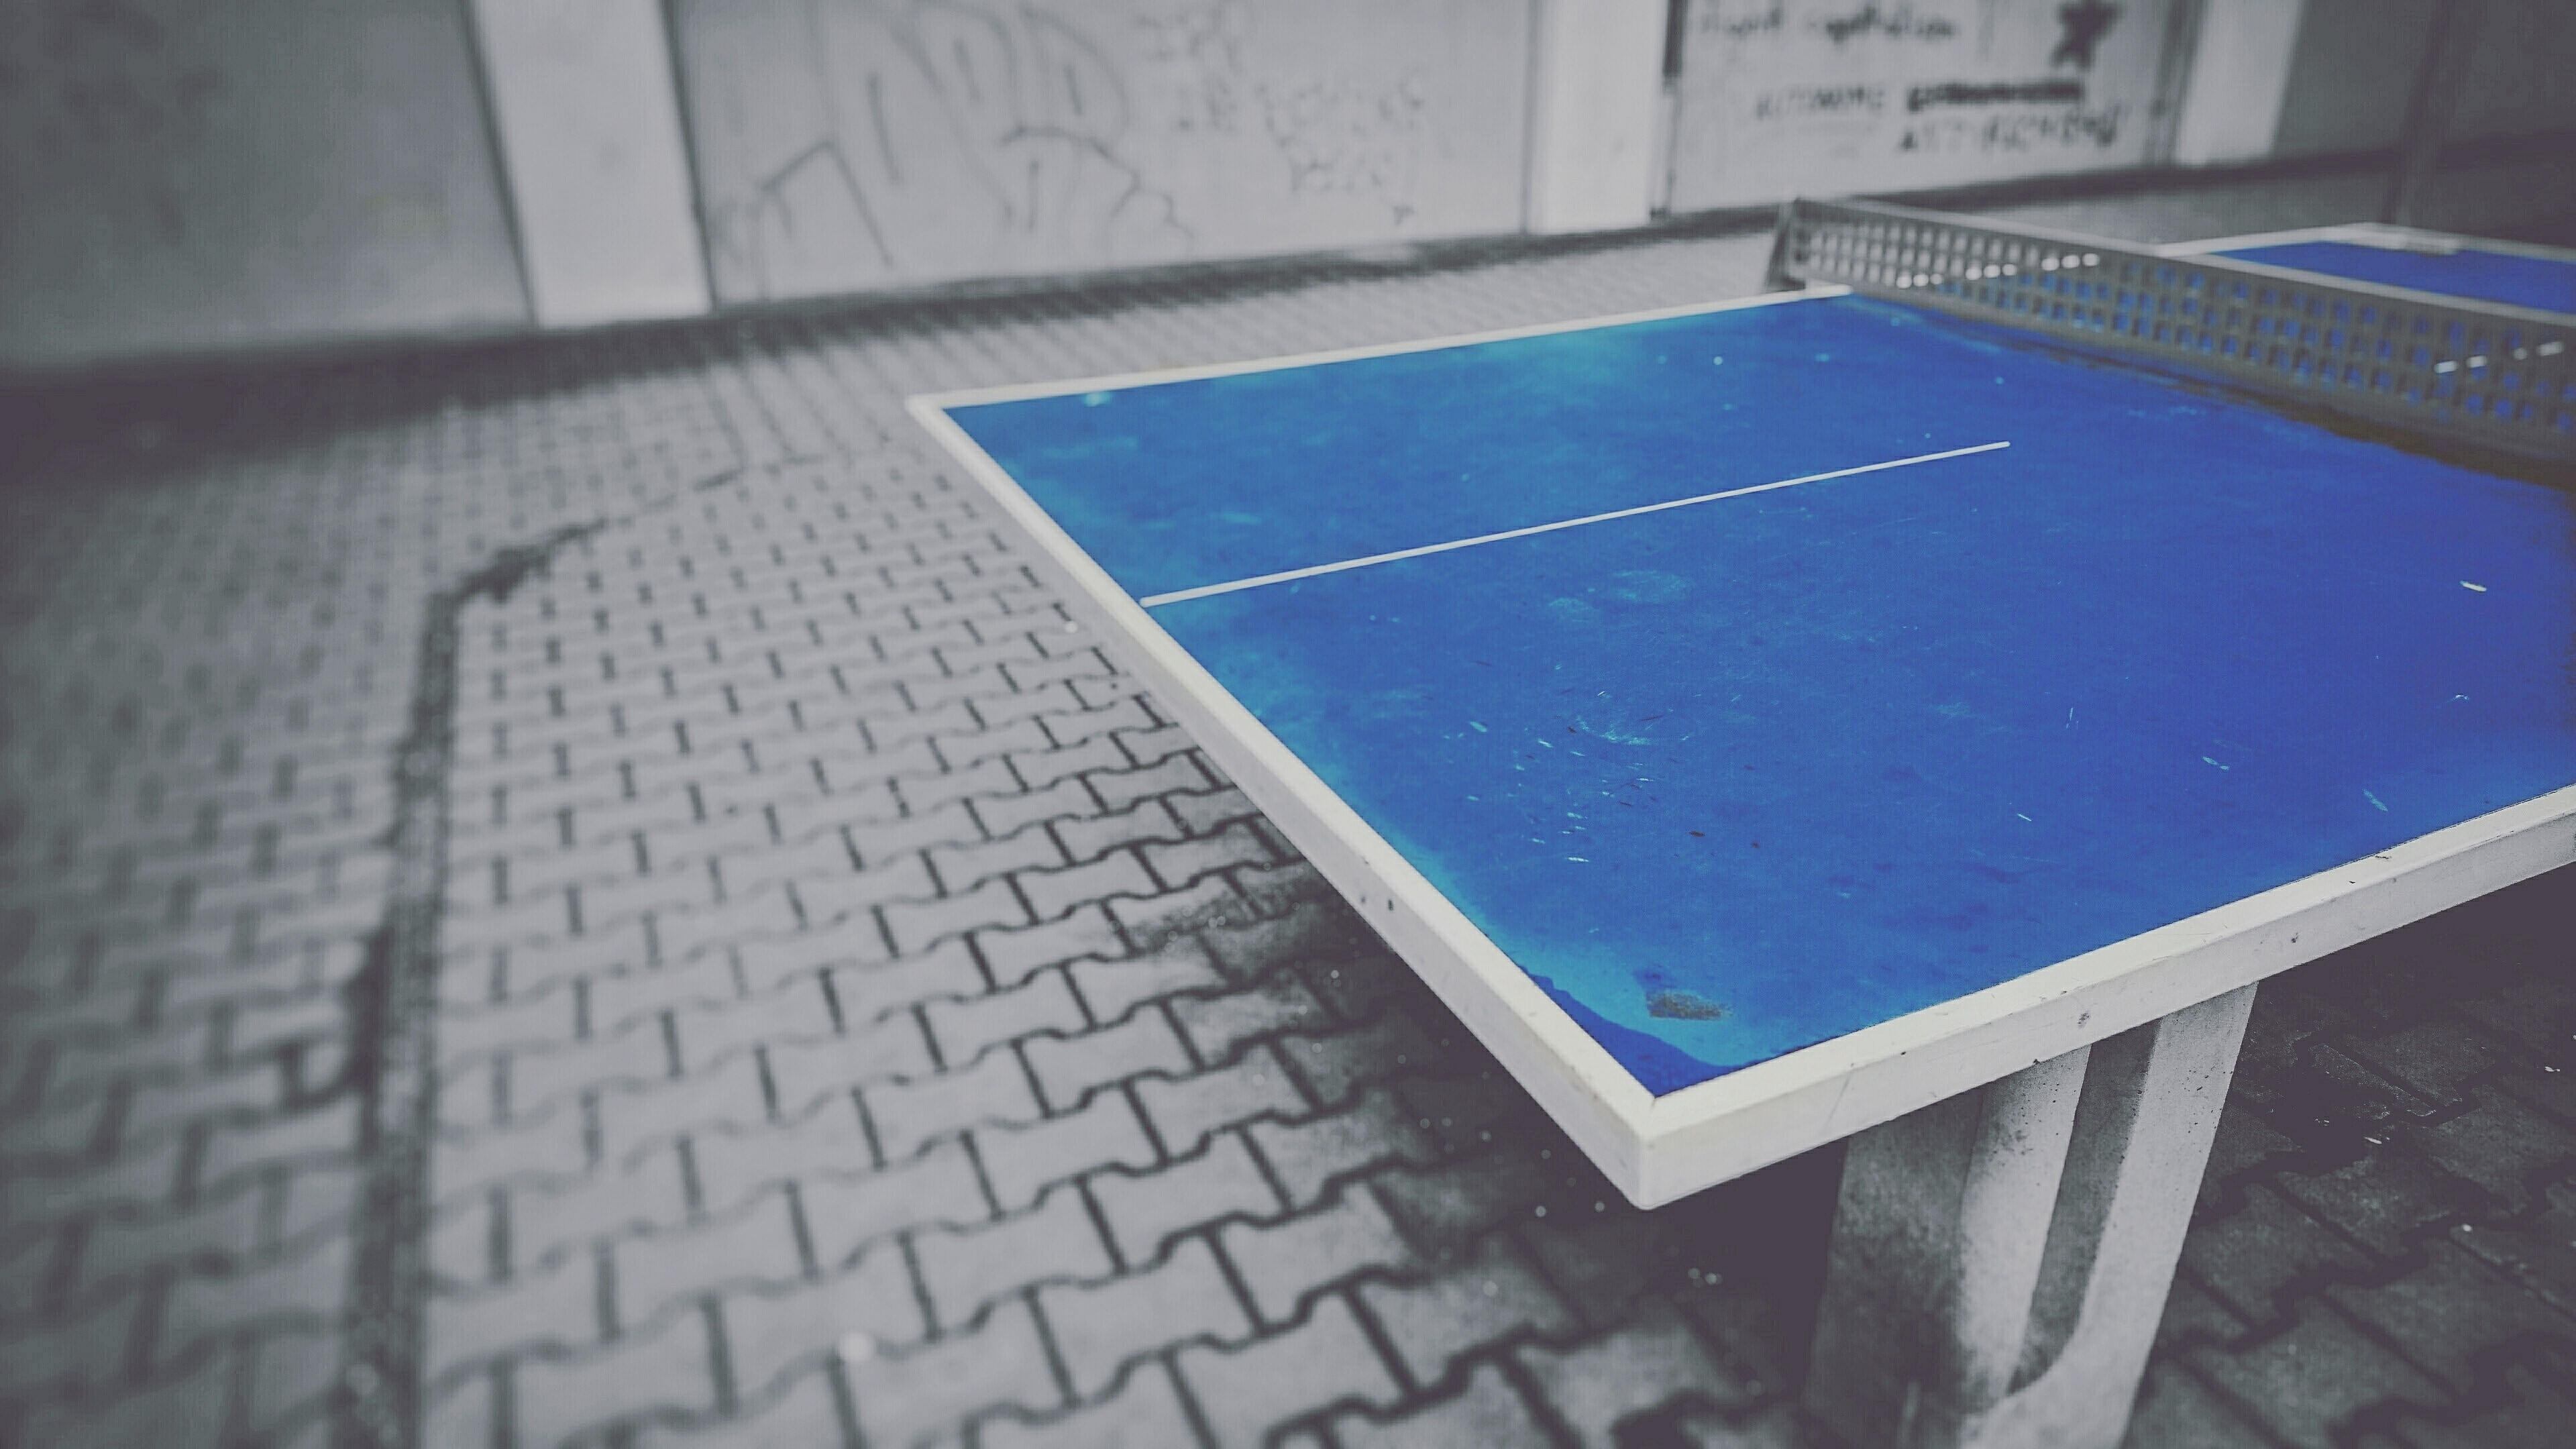 blue and white table tennis table